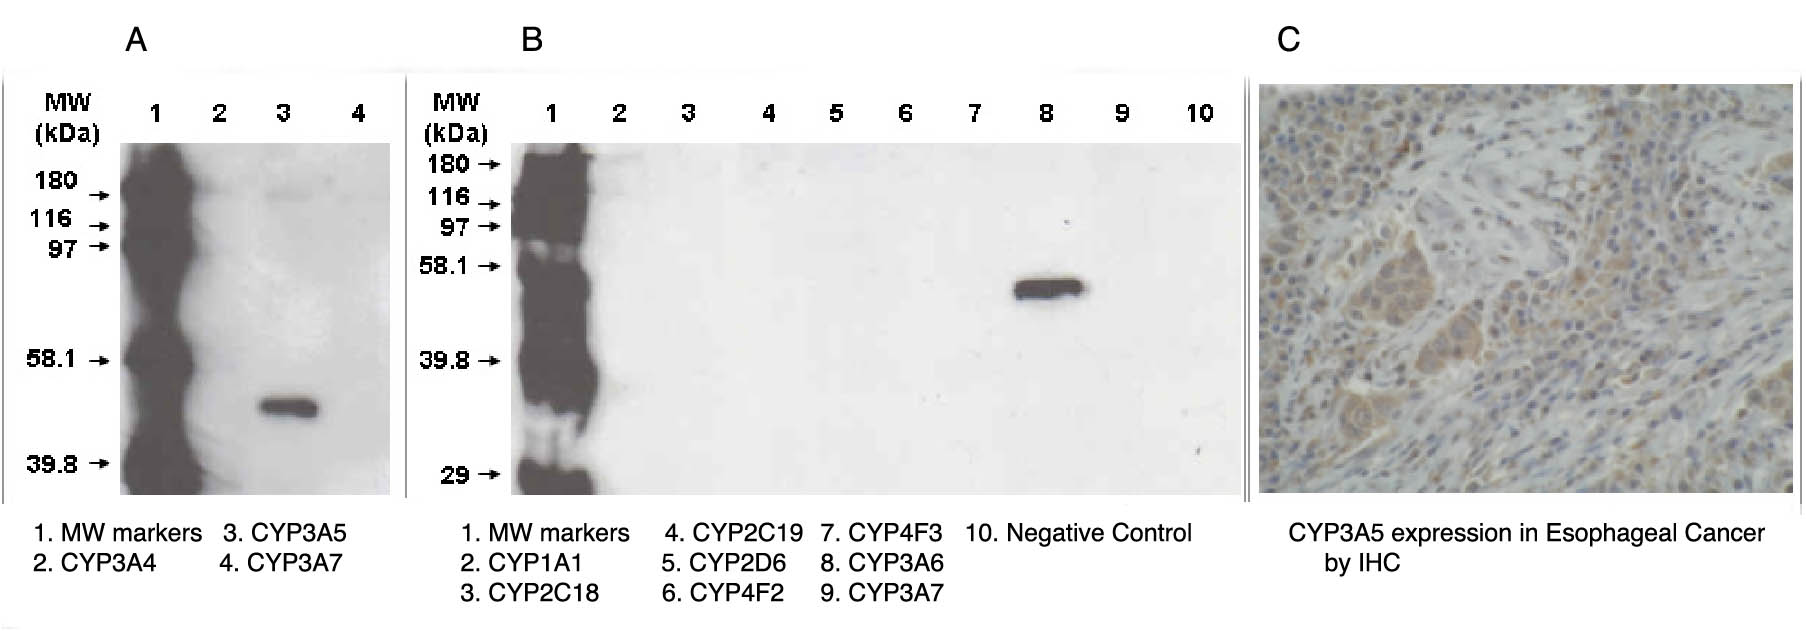 "A. and B. Western blot using 3A5 antibody (Cat. No. X2047M) on recombinant CYP450 proteins.
C. Immunohistochemistry stain using 3A5 antibody on oesophagus cancer tissue."